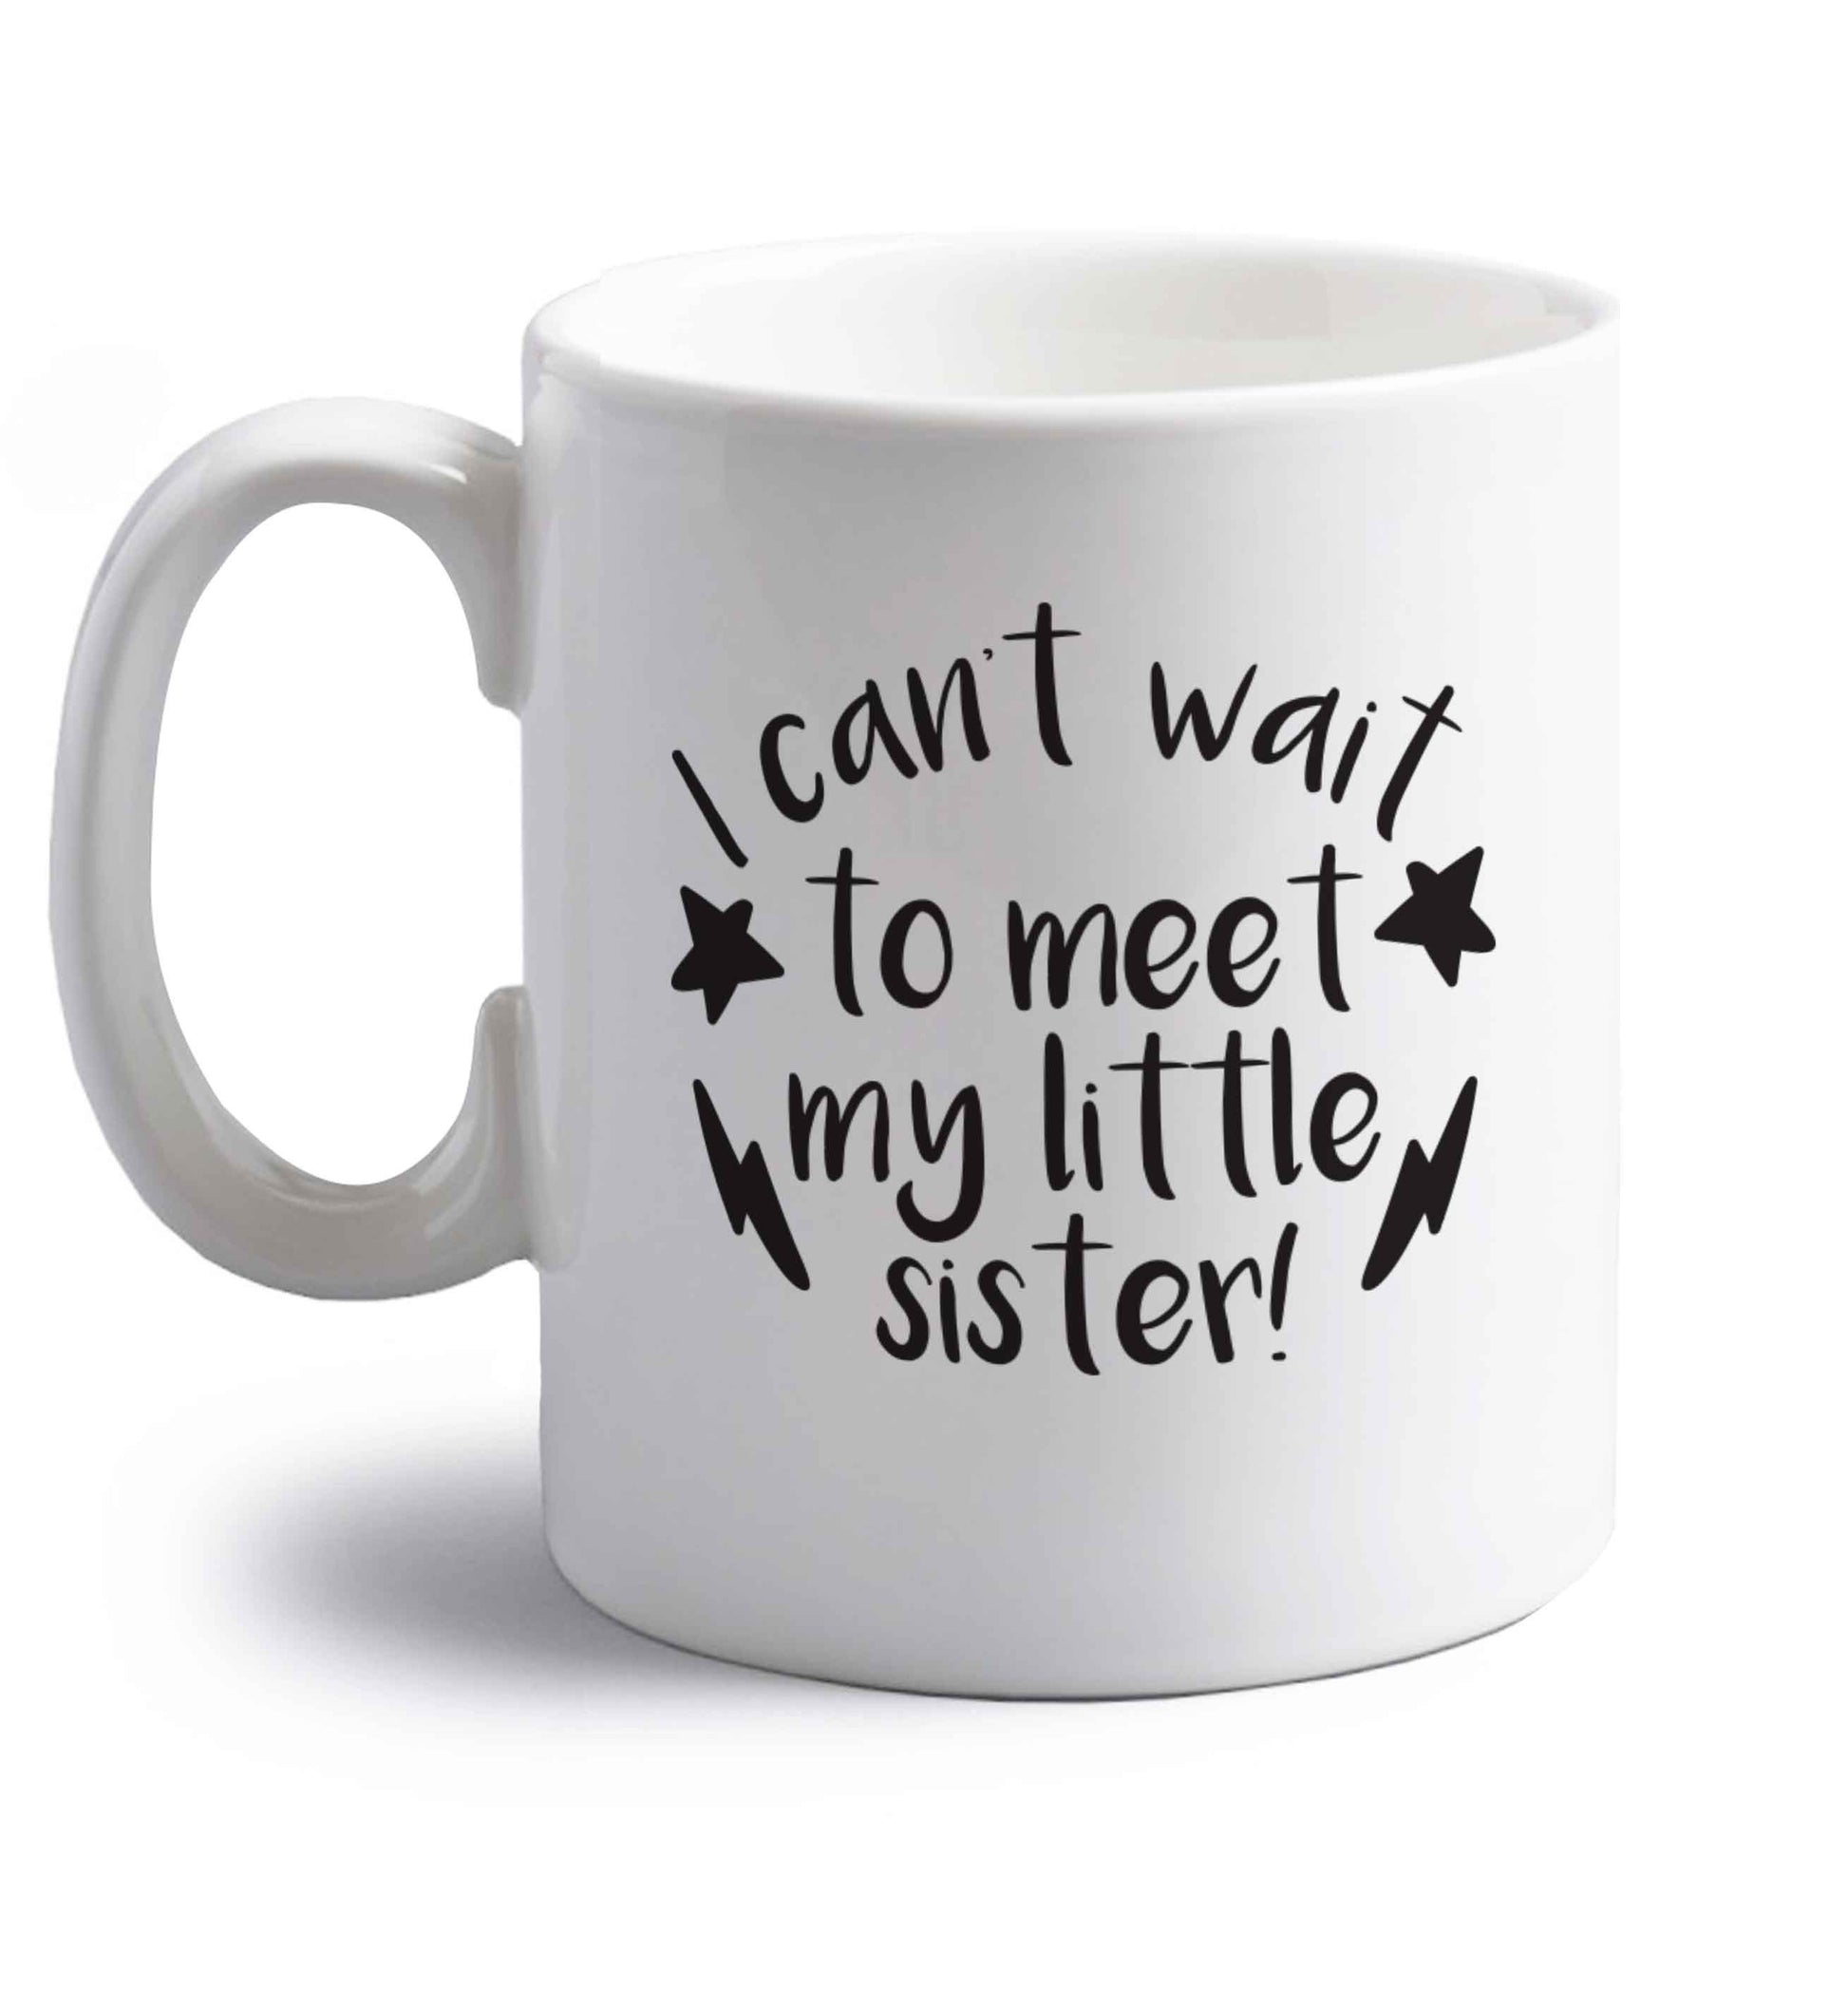 Something special growing inside it's my little sister I can't wait to say hi! right handed white ceramic mug 